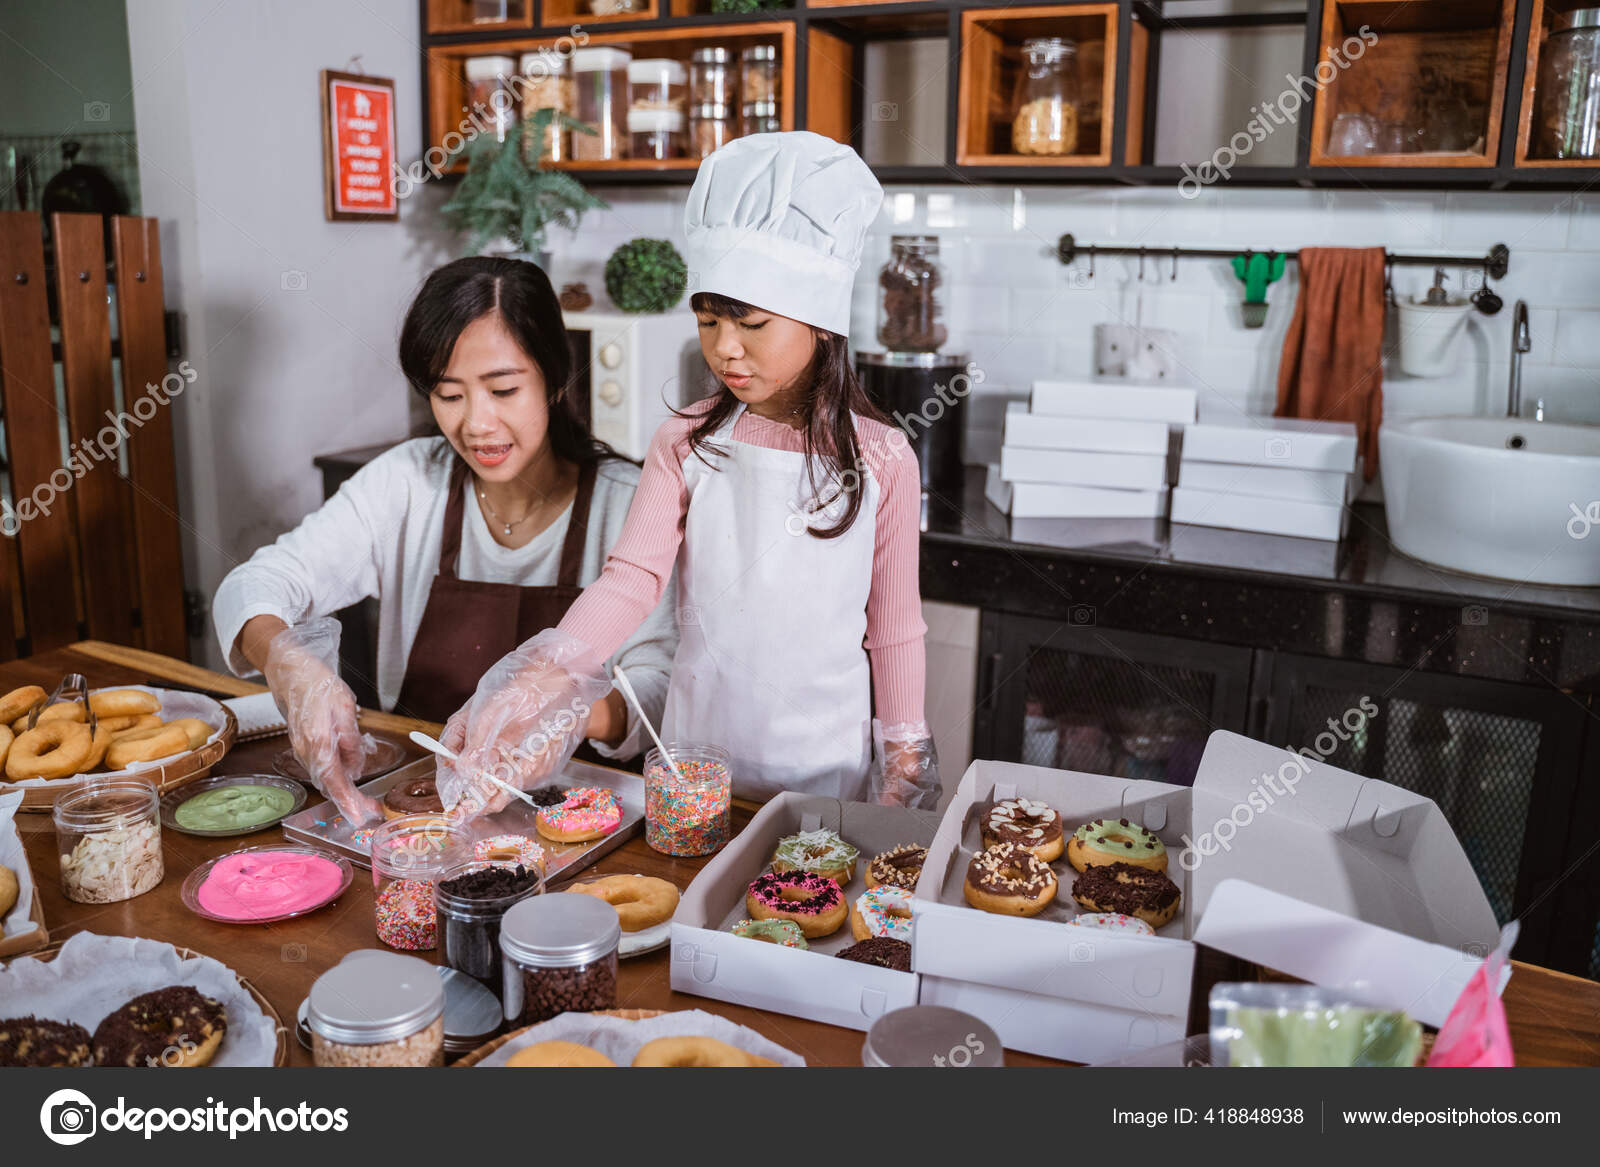 Personal Perspective Of Mother Making For Her Children Donuts With A Donut  Maker High-Res Stock Photo - Getty Images